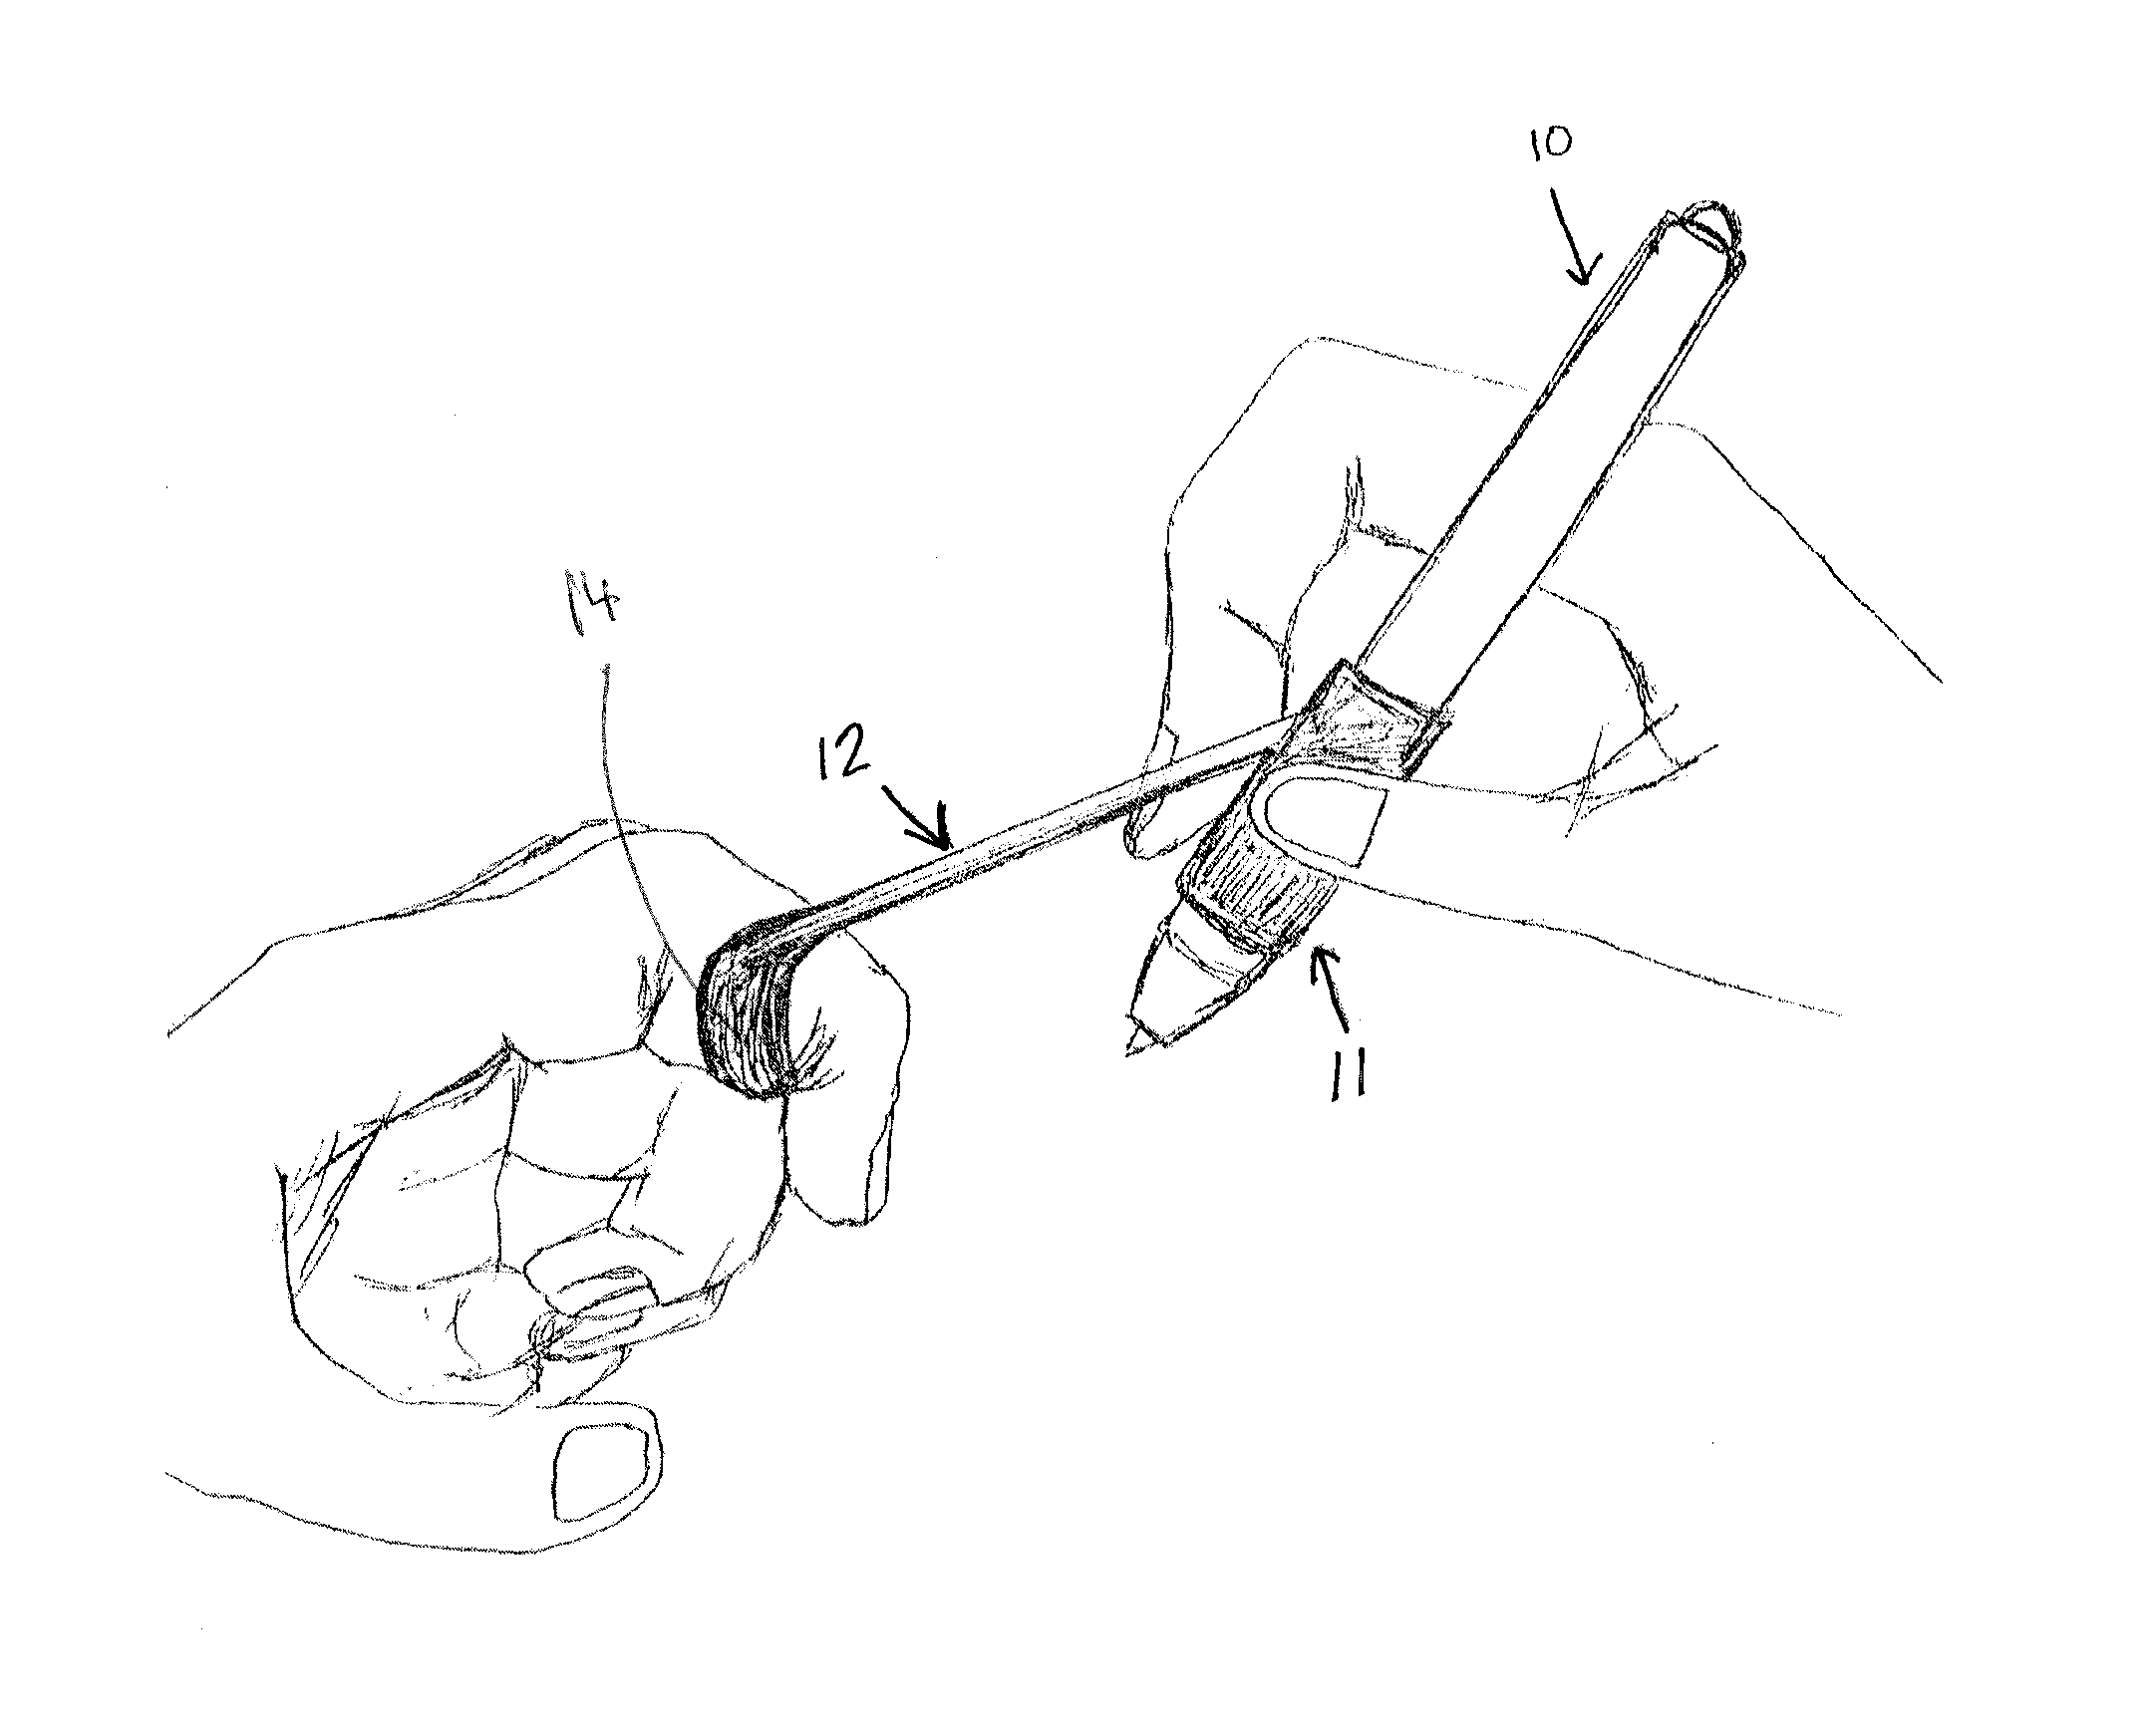 Attention Enhancing Writing Instrument Accessory and Method of Use